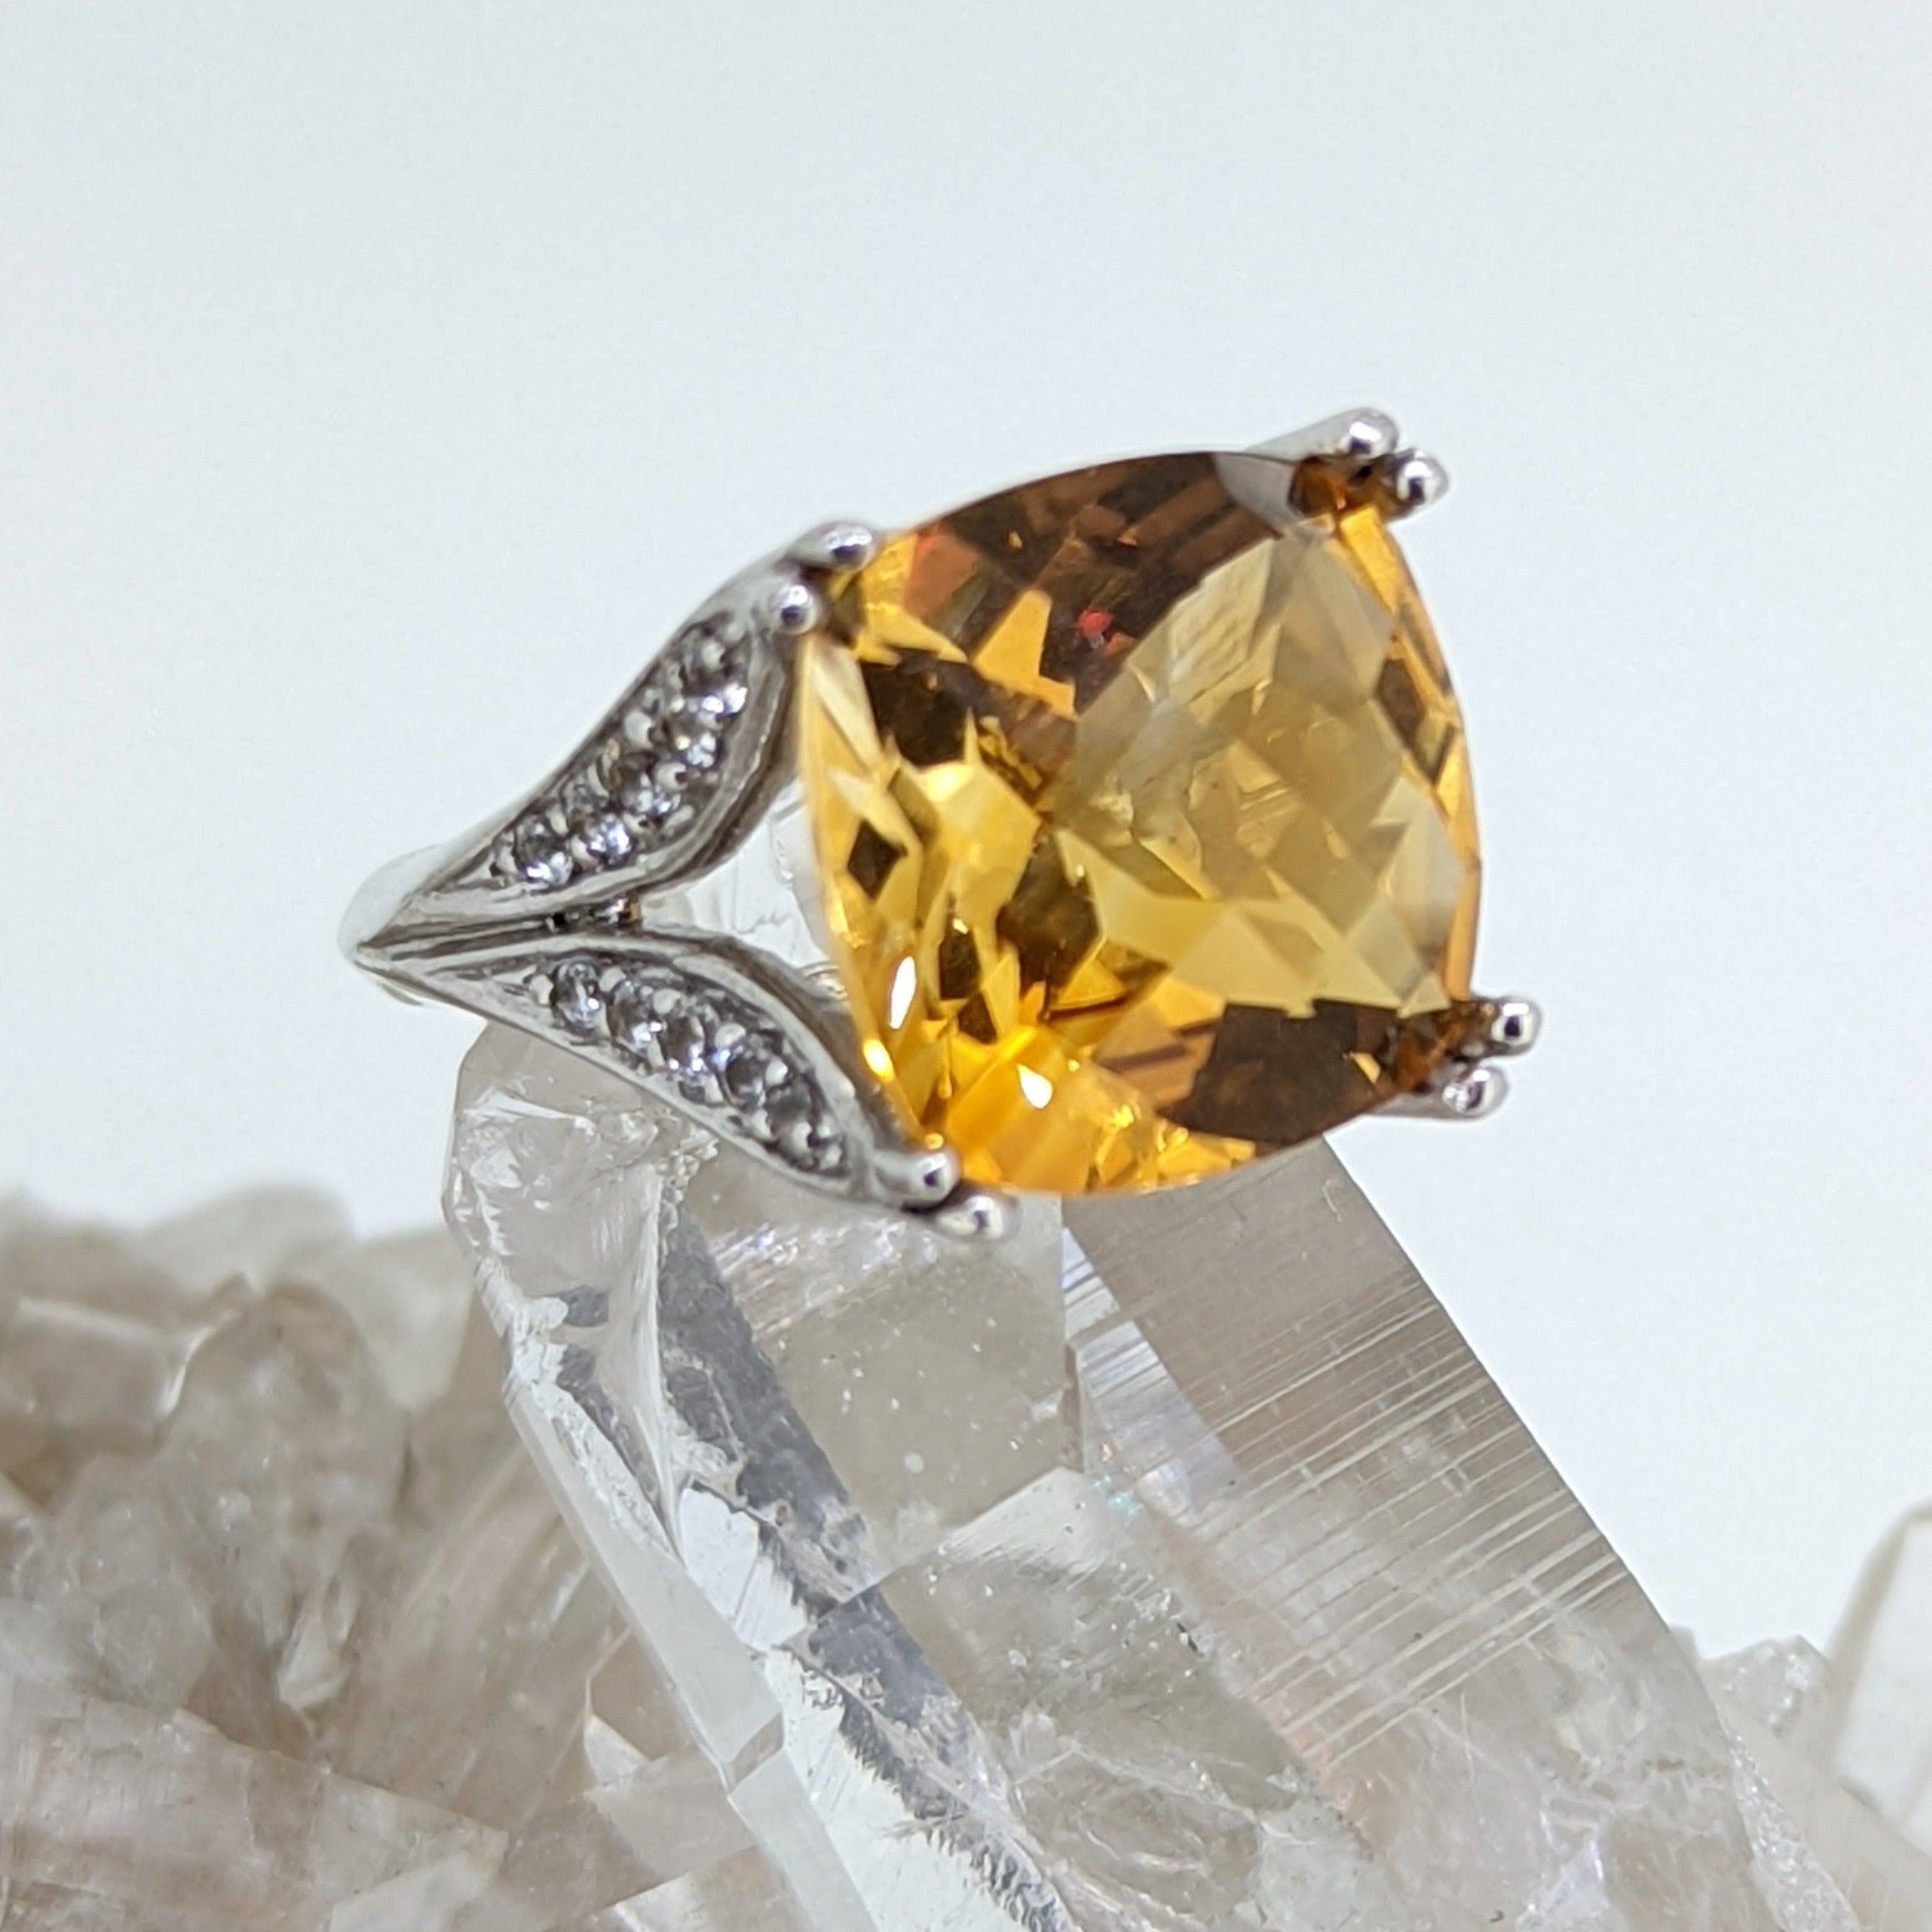 Large Citrine Fashion Ring (R2227) - Summit Jewelers | 7821 Big Bend Blvd.  | Webster Groves, MO | 63119 | 314.962.1400